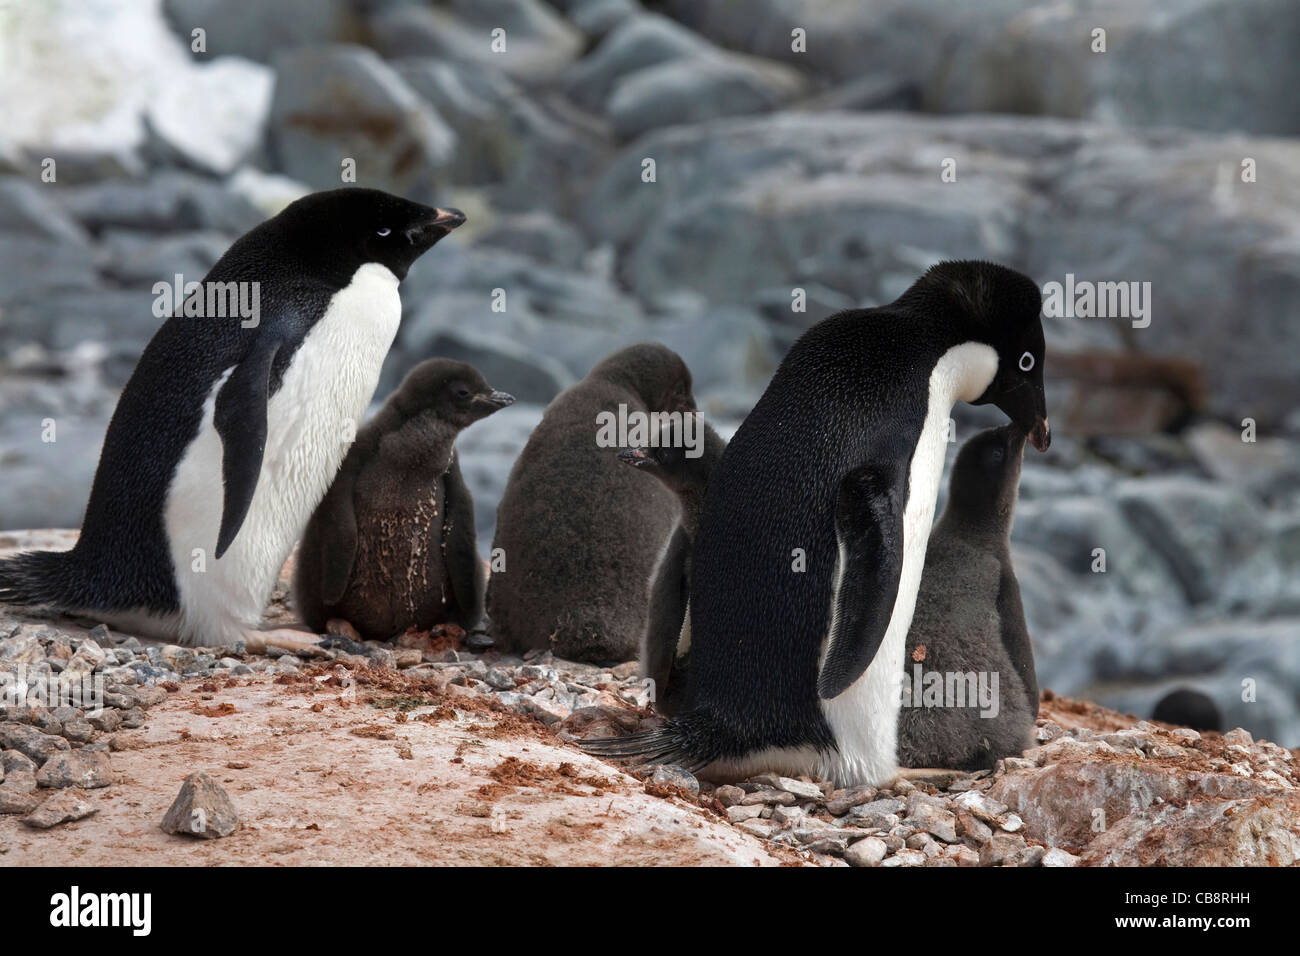 Adélie Penguins (Pygoscelis adeliae) with chicks on nest in rookery at colony, Petermann Island, Antarctica Stock Photo